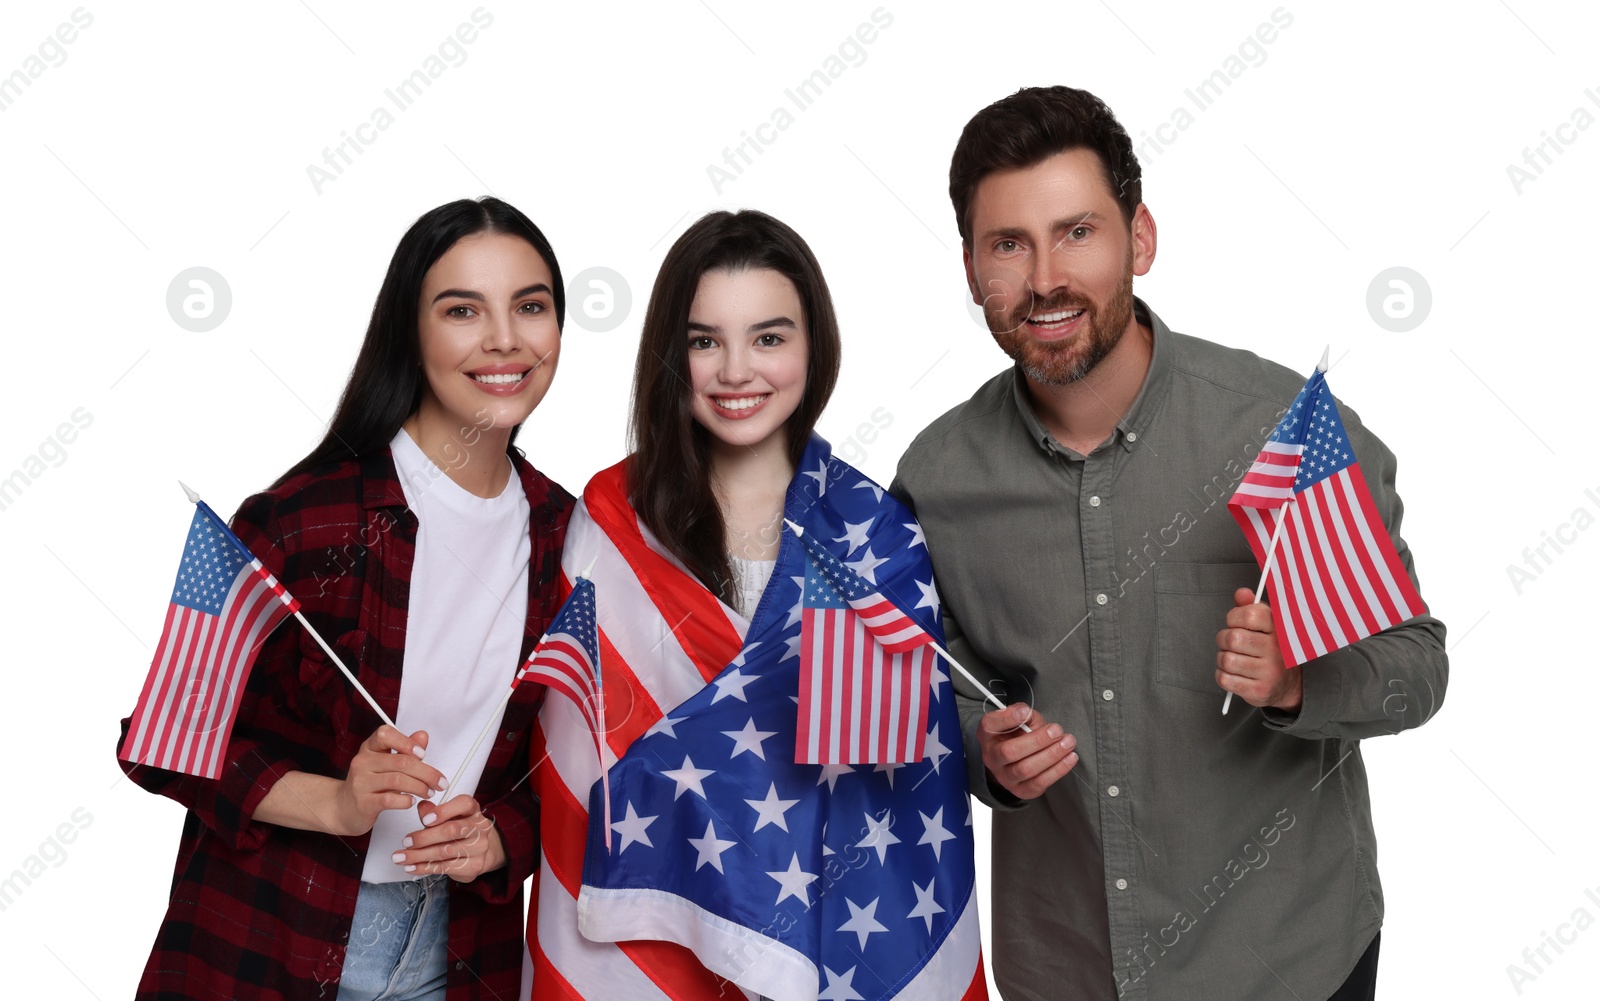 Image of 4th of July - Independence day of America. Happy family with national flags of United States on white background